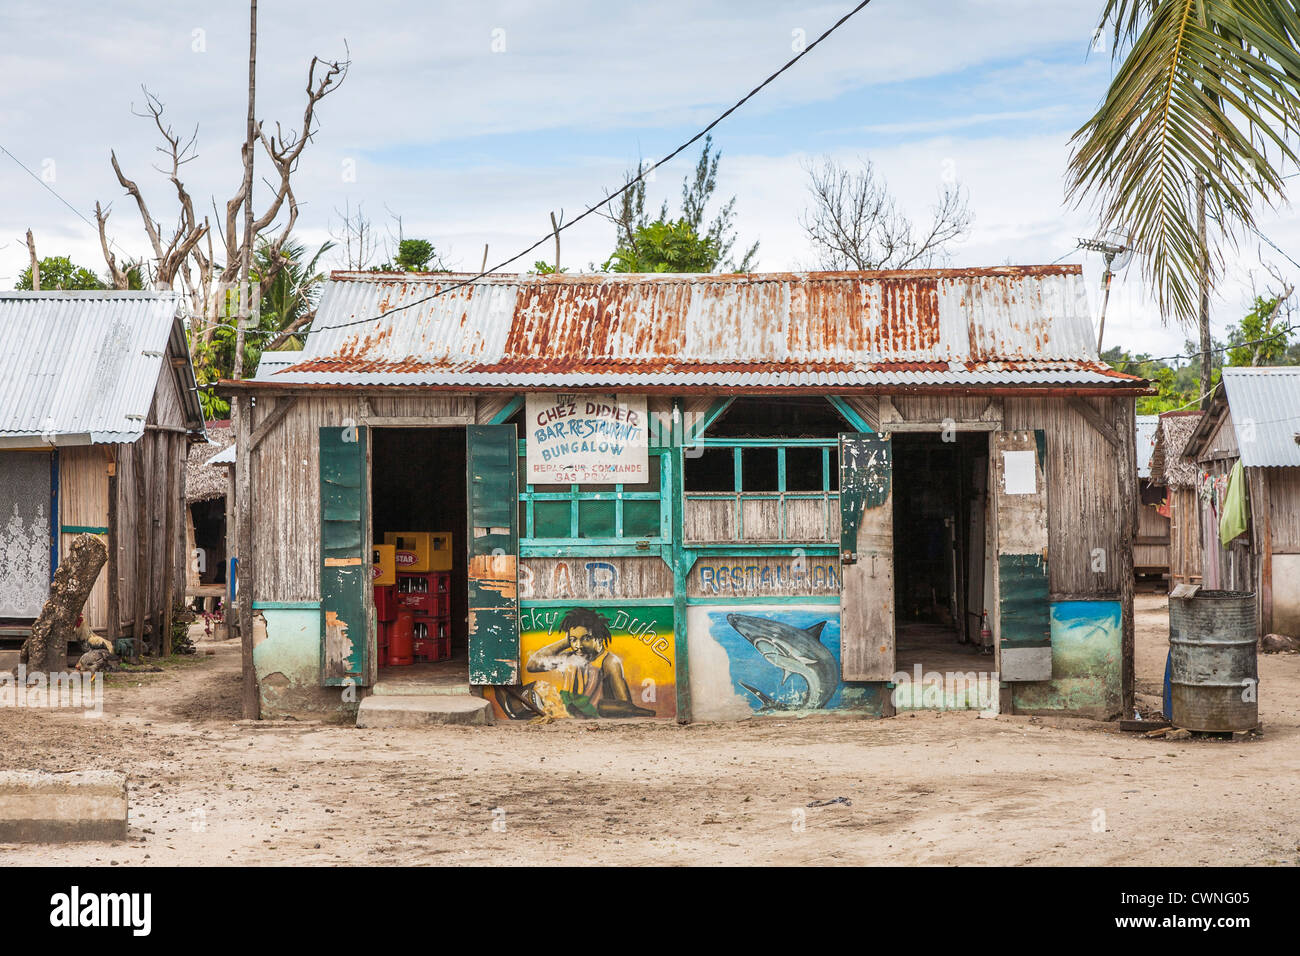 Isle St Marie, Madagascar - bar/restaurant in shack with corrugated metal roof in village Stock Photo